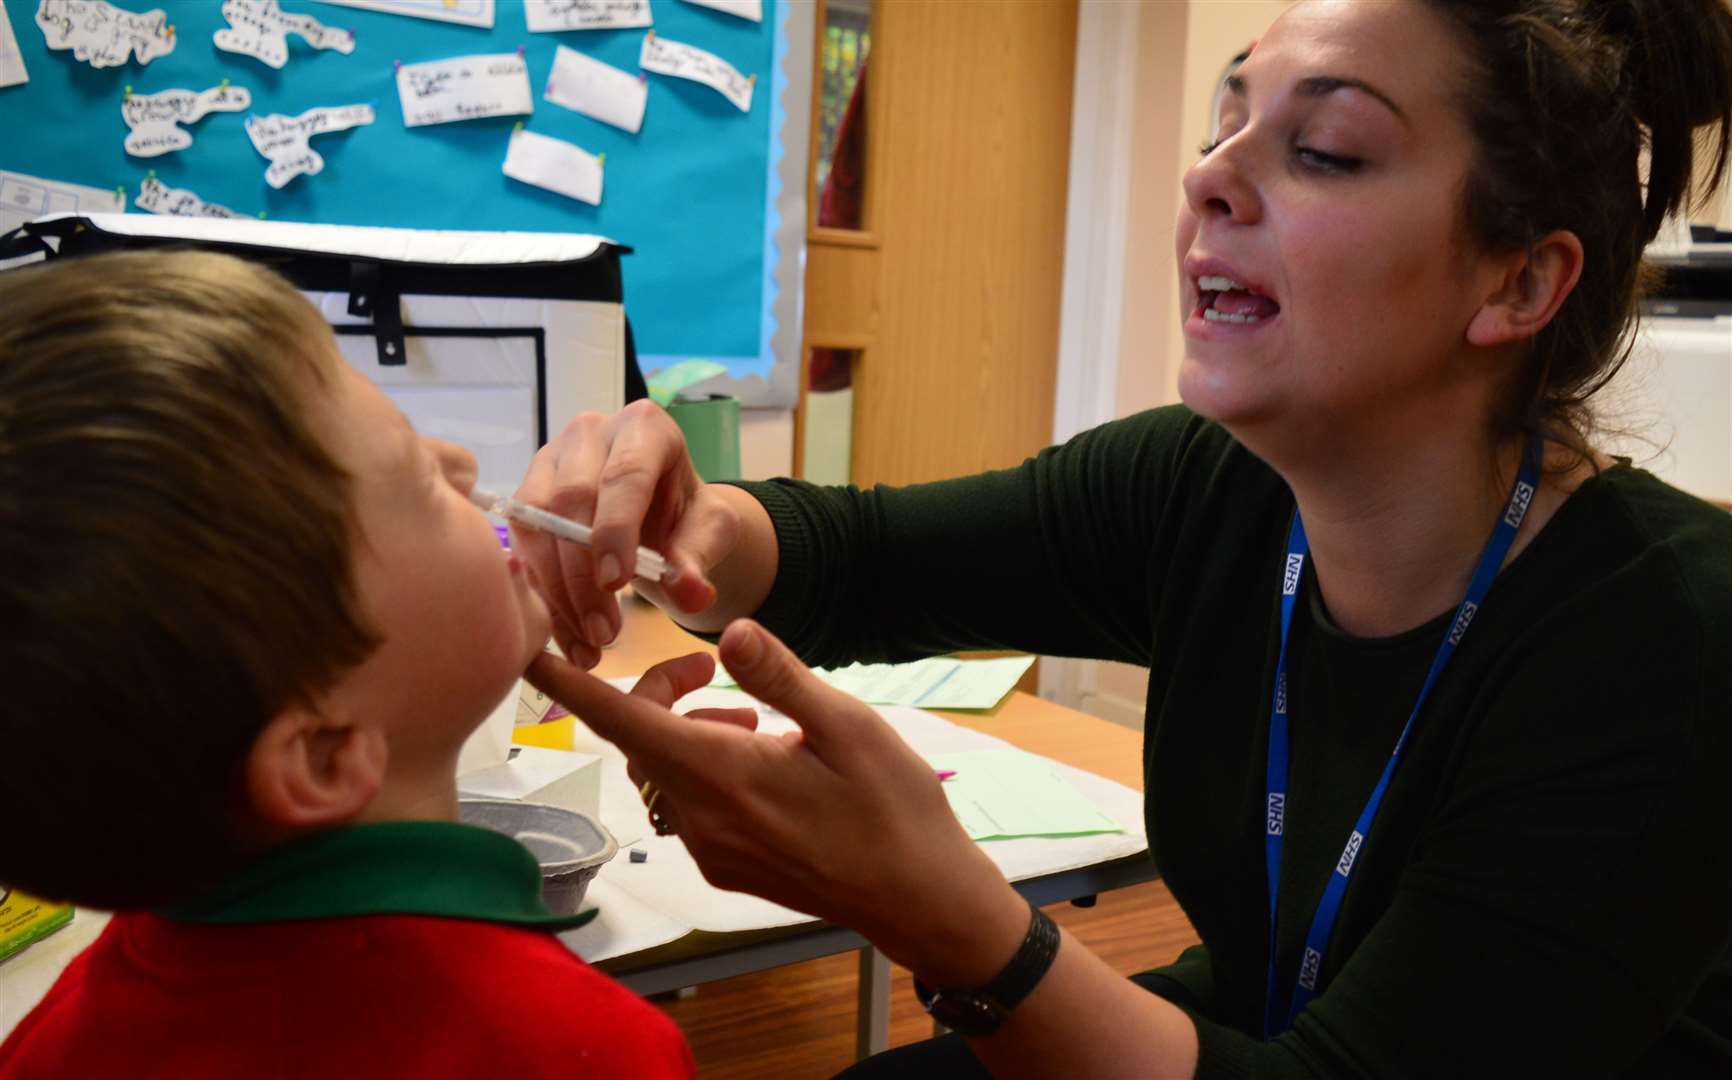 An expansion to the flu immunisation programme is also planned for September